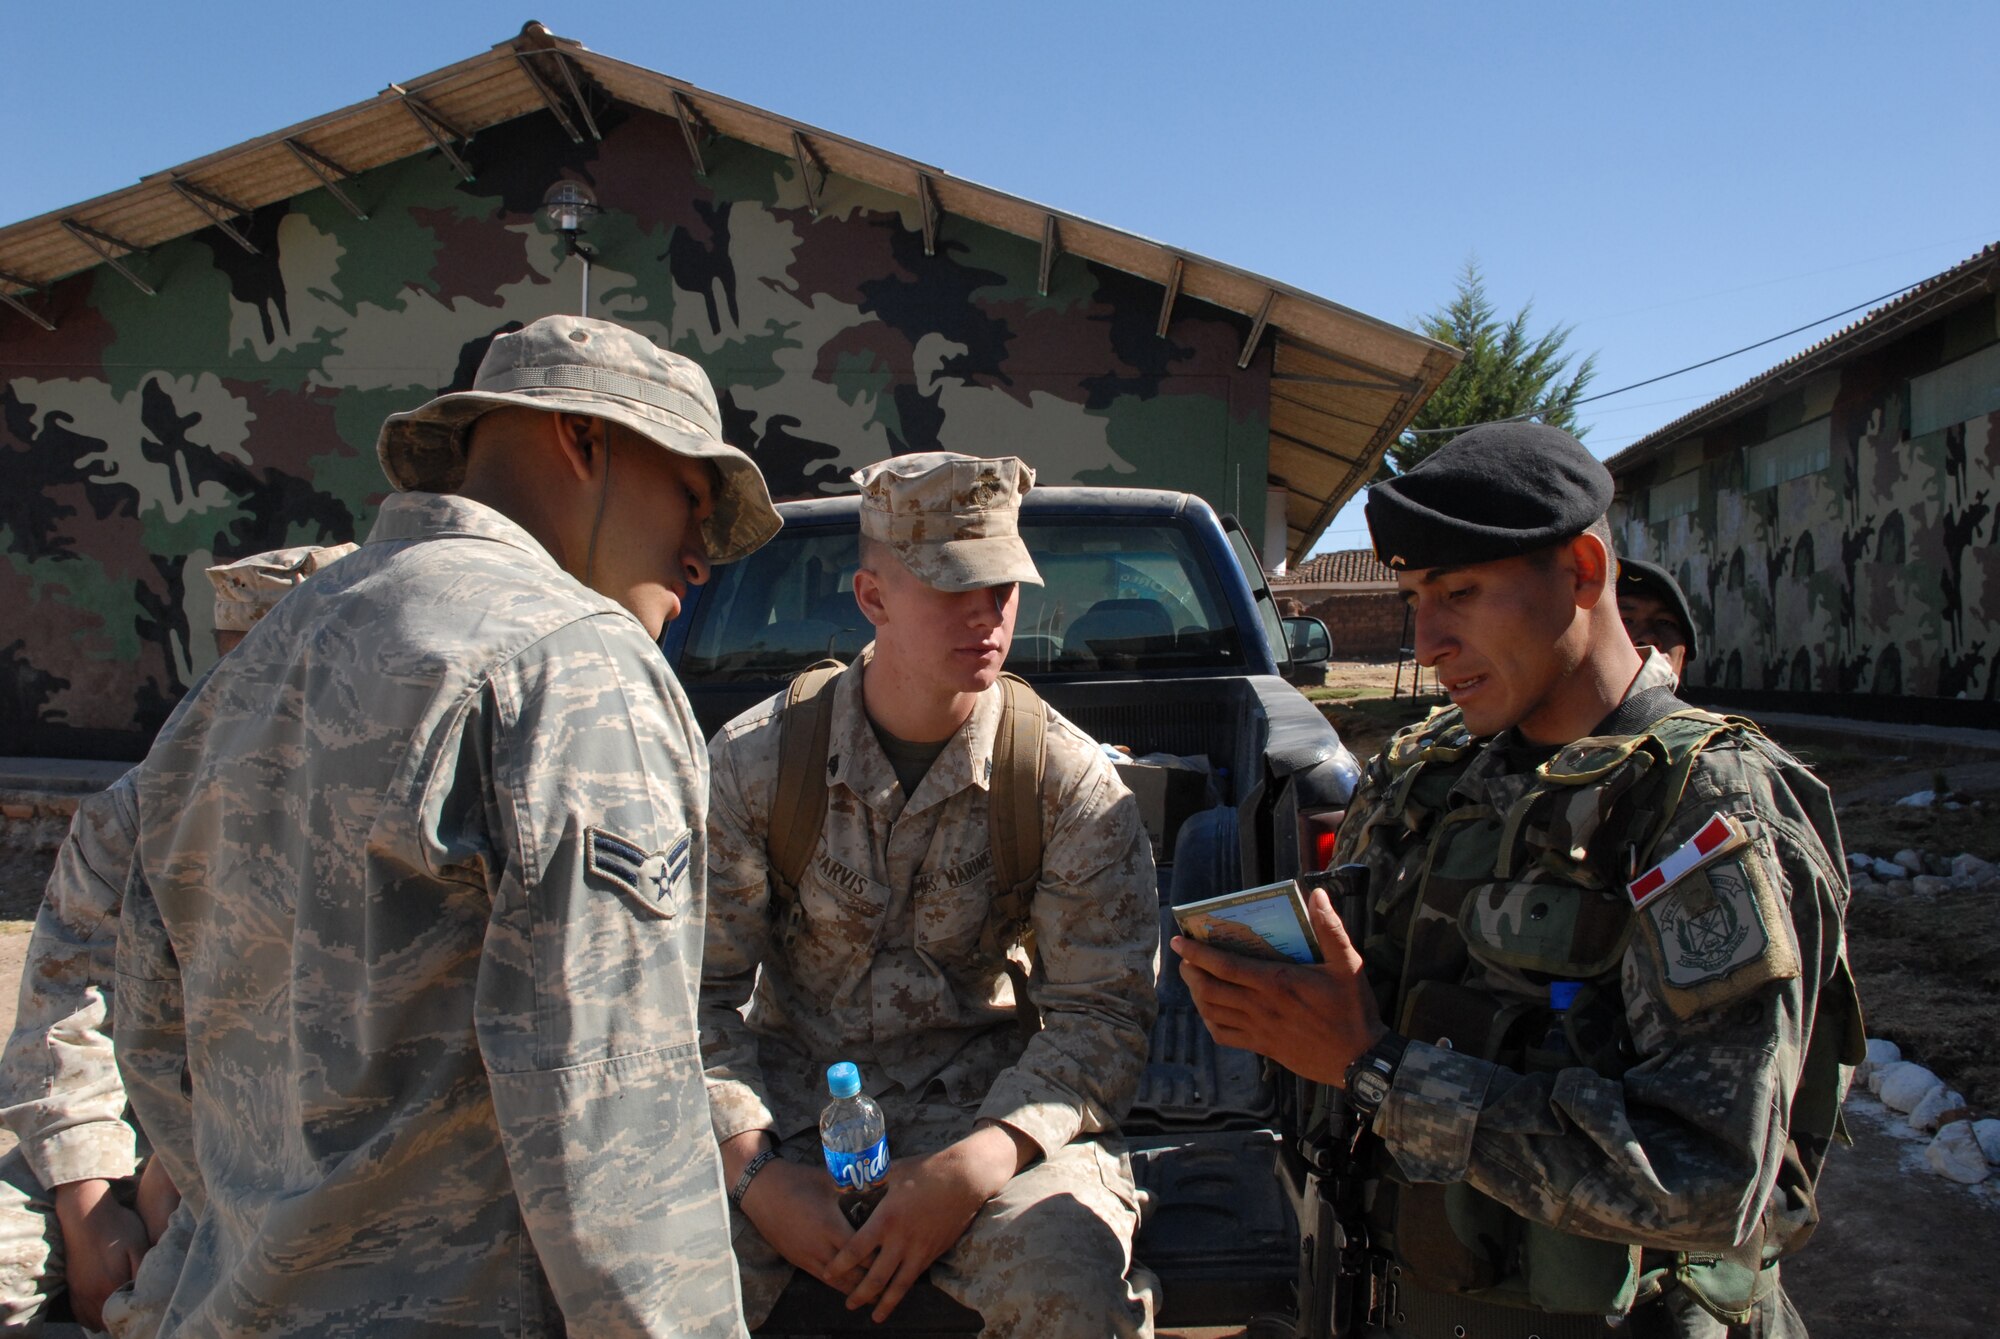 A Peruvian soldier explains the Peruvian rank structure to U.S. Marine Sgt. Alan Parvis, deployed from the 4th Civil Affairs Group at Anacostia Naval Annex, District of Columbia, and Airman 1st Class George Monroe, deployed from Tinker Air Force Base, Okla., June 6, during a visit to Huanta, Peru, the construction site where wells are being built in support of New Horizons Peru 2008, a humanitarian event that benefits underprivileged Peruvians. U.S. Air Force, Army, Marines, and Navy servicemembers came together to build new schools, clinics, and water wells which will accommodate nearly 5,200 Peruvians. (U.S. Air Force photo/Airman 1st Class Tracie Forte)